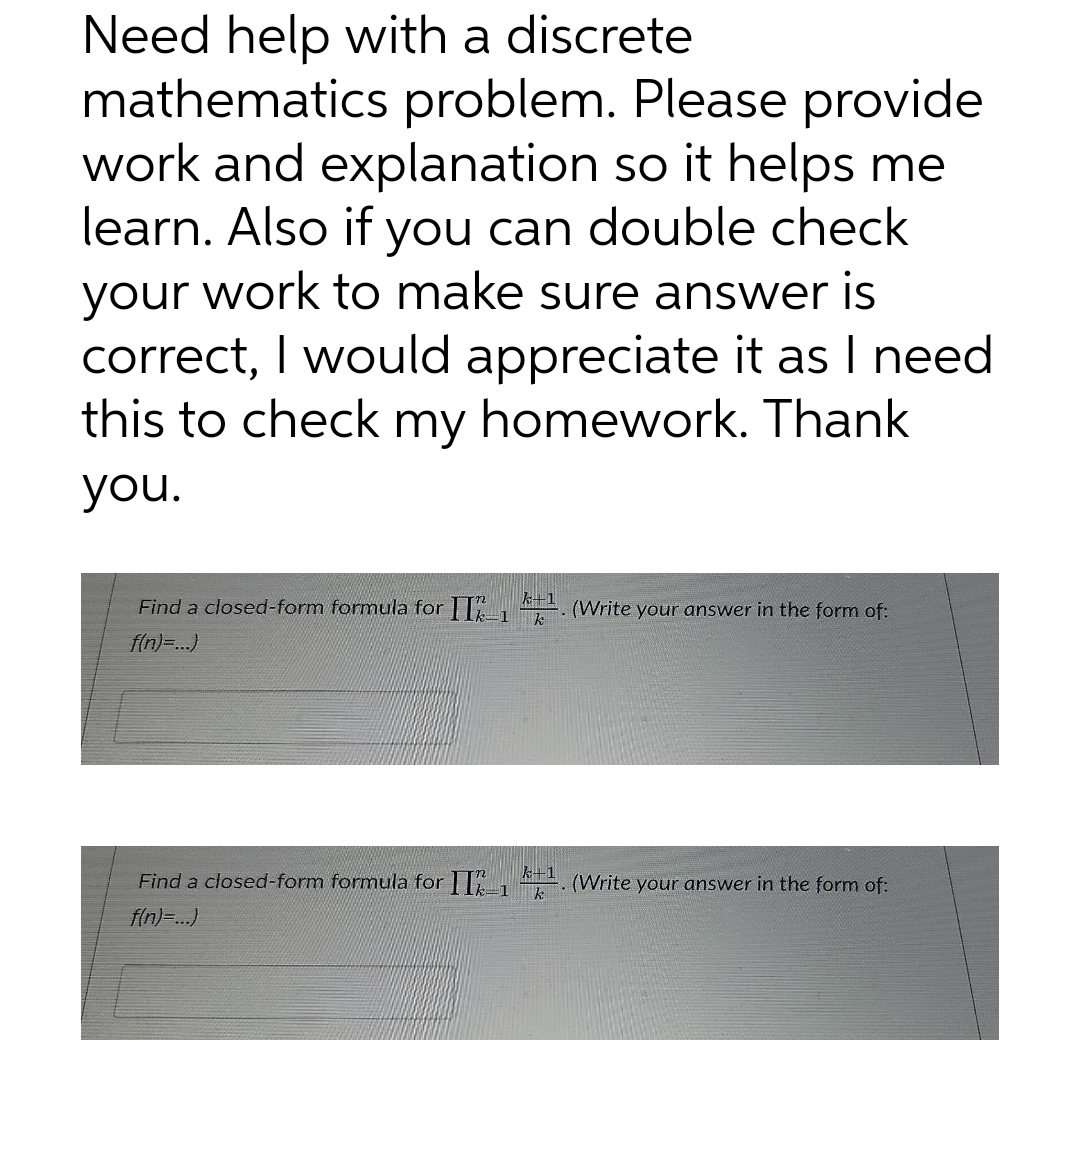 Need help with a discrete
mathematics problem. Please provide
work and explanation so it helps me
learn. Also if you can double check
your work to make sure answer is
correct, I would appreciate it as I need
this to check my homework. Thank
you.
k+1
Find a closed-form formula for II1¹. (Write your answer in the form of:
f(n)=...)
k+1
k
Find a closed-form formula for II2_₁ (Write your answer in the form of:
f(n)=...)